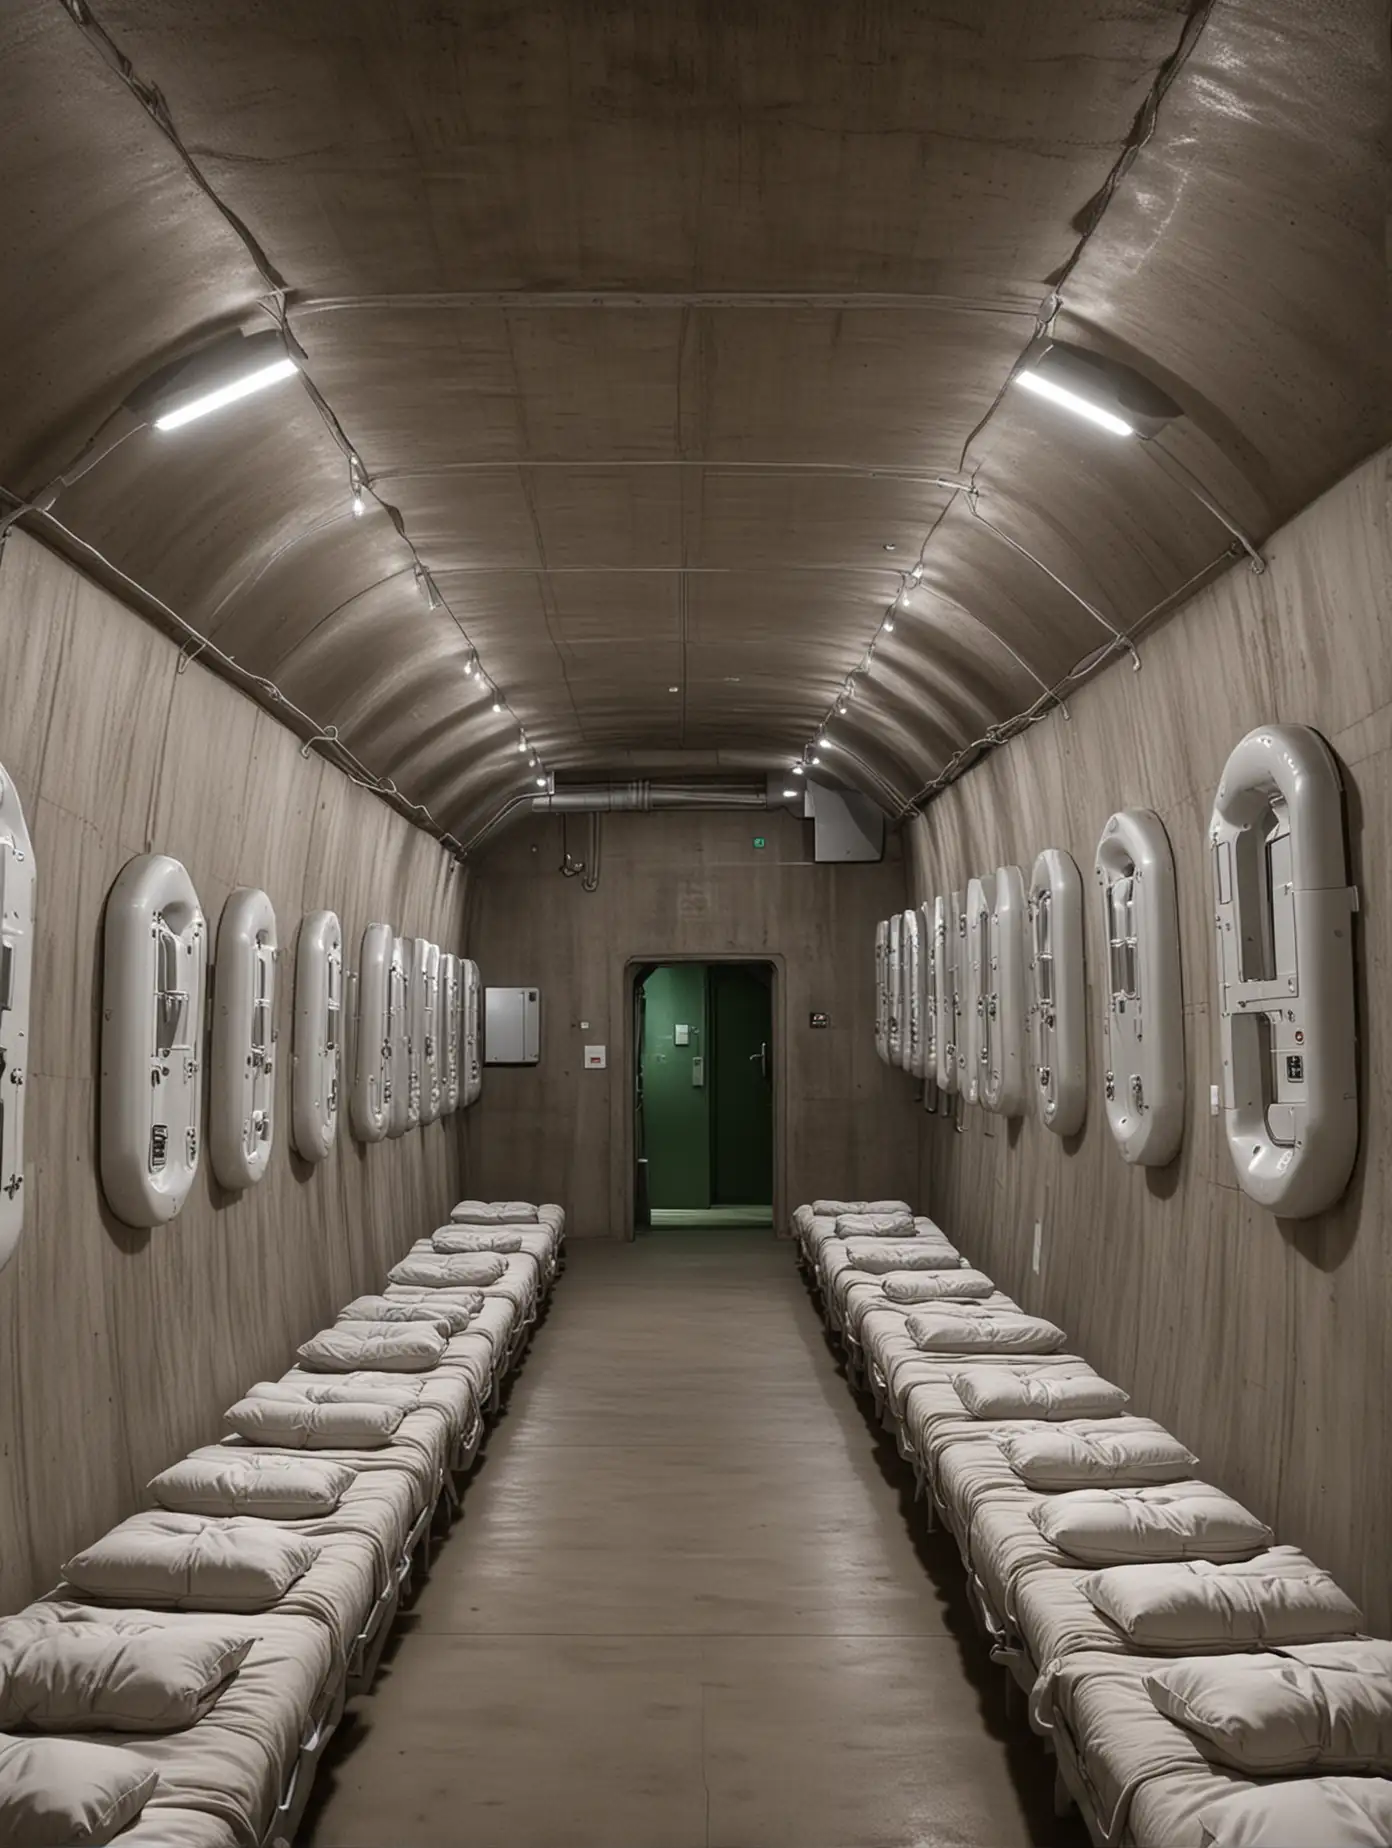 lot of hypersleep pods in an underground bunker, symmetrically placed
